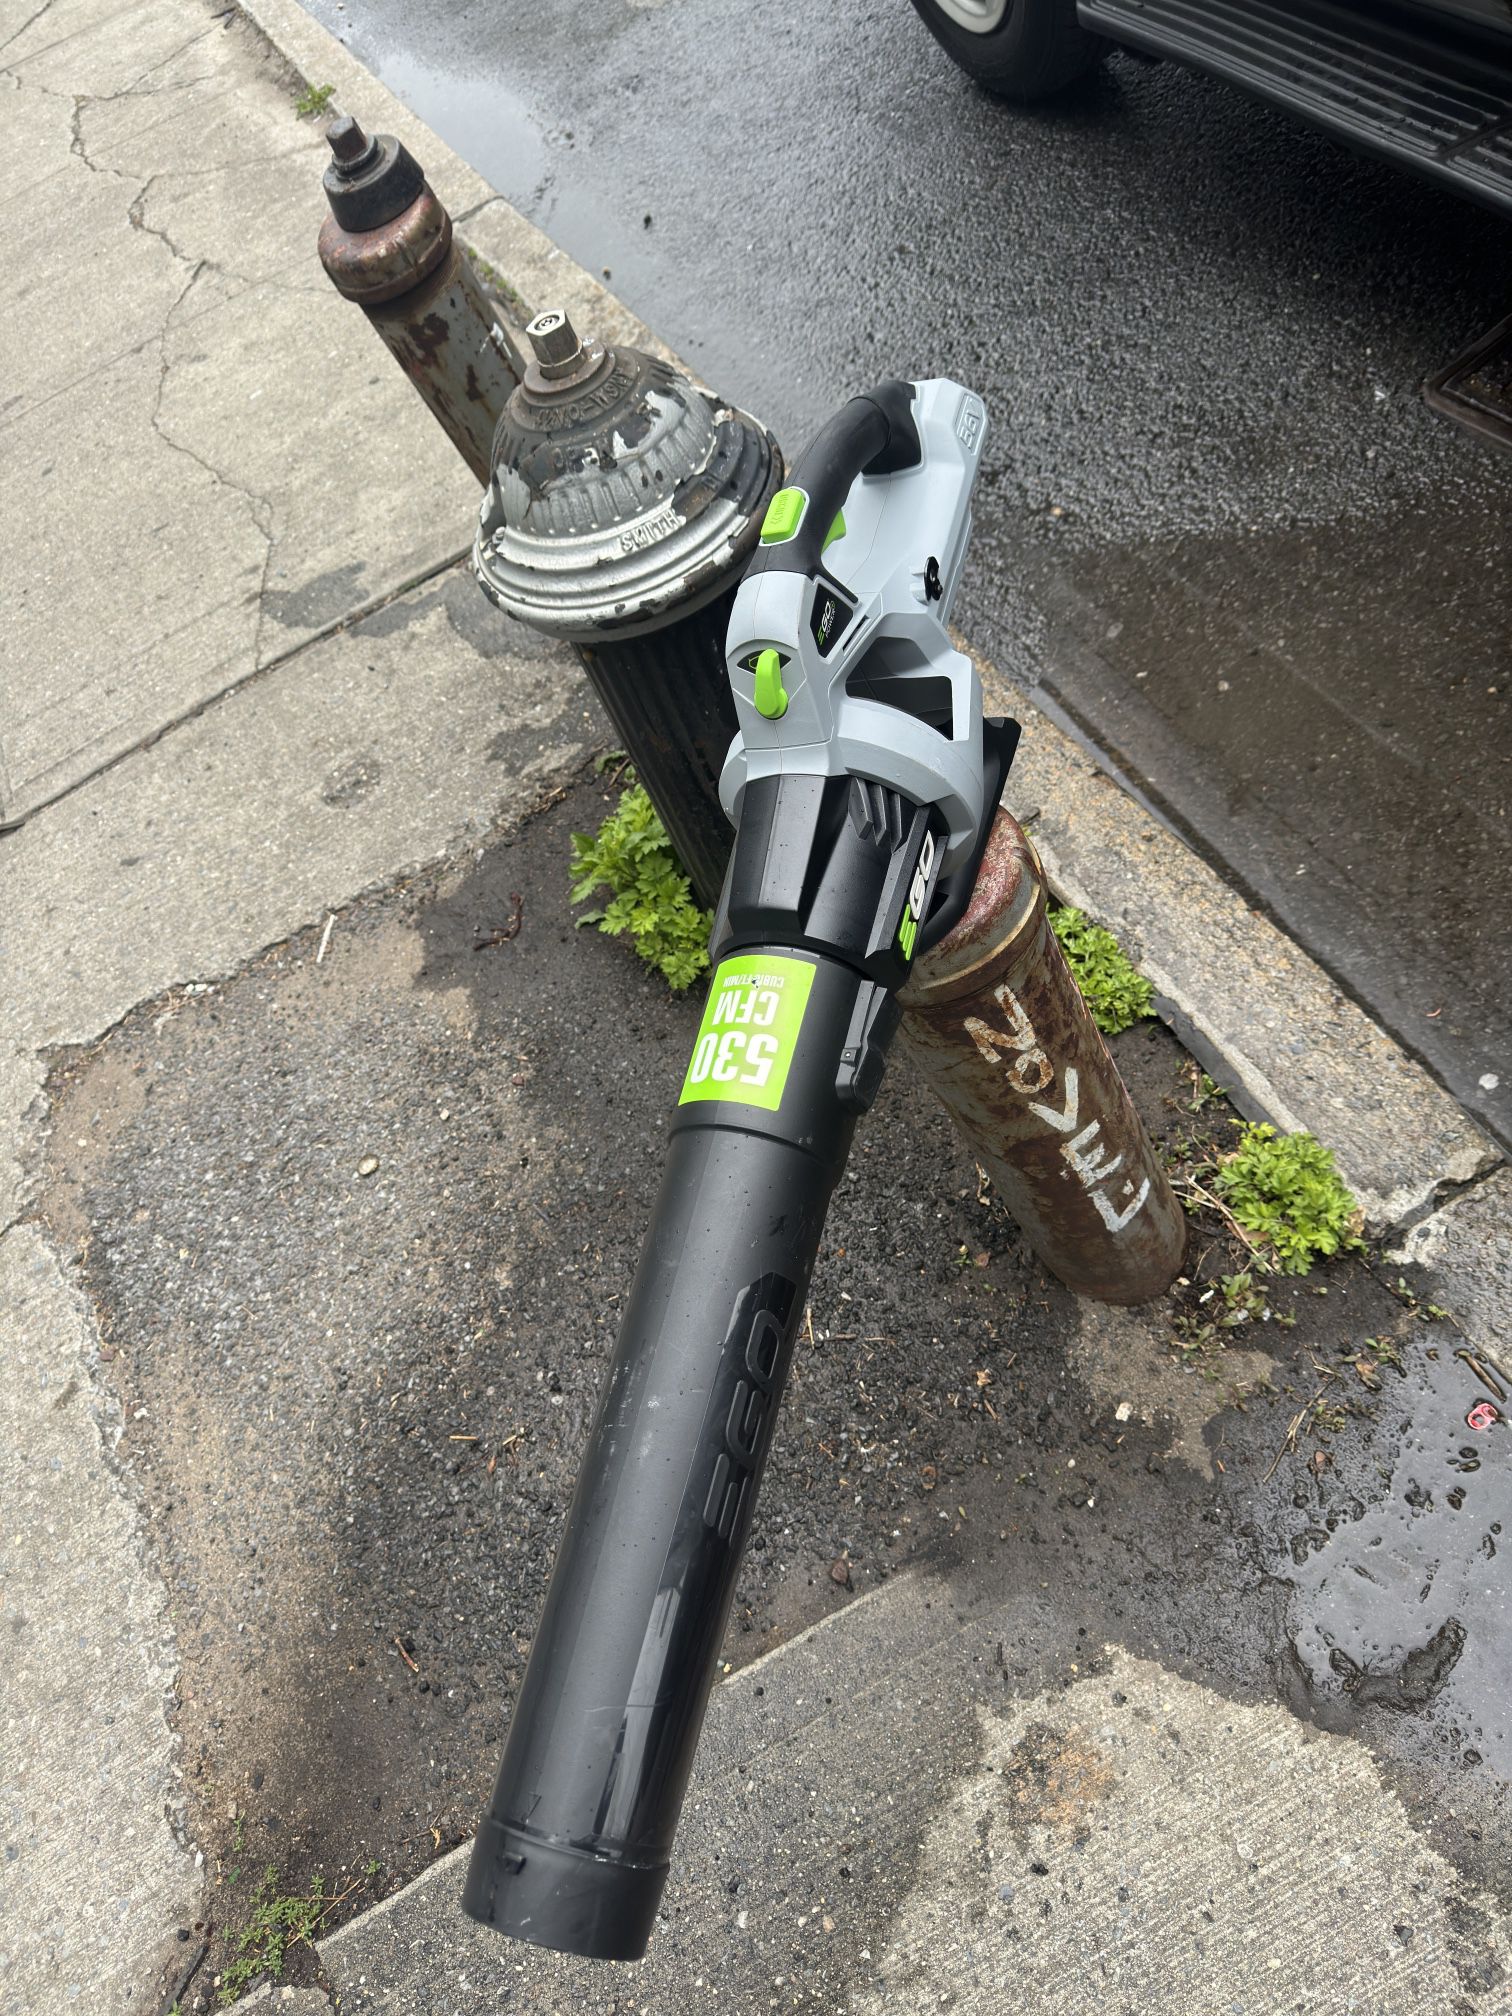 EGO 530 Leaf Blower  For Sale ( Tool Only)